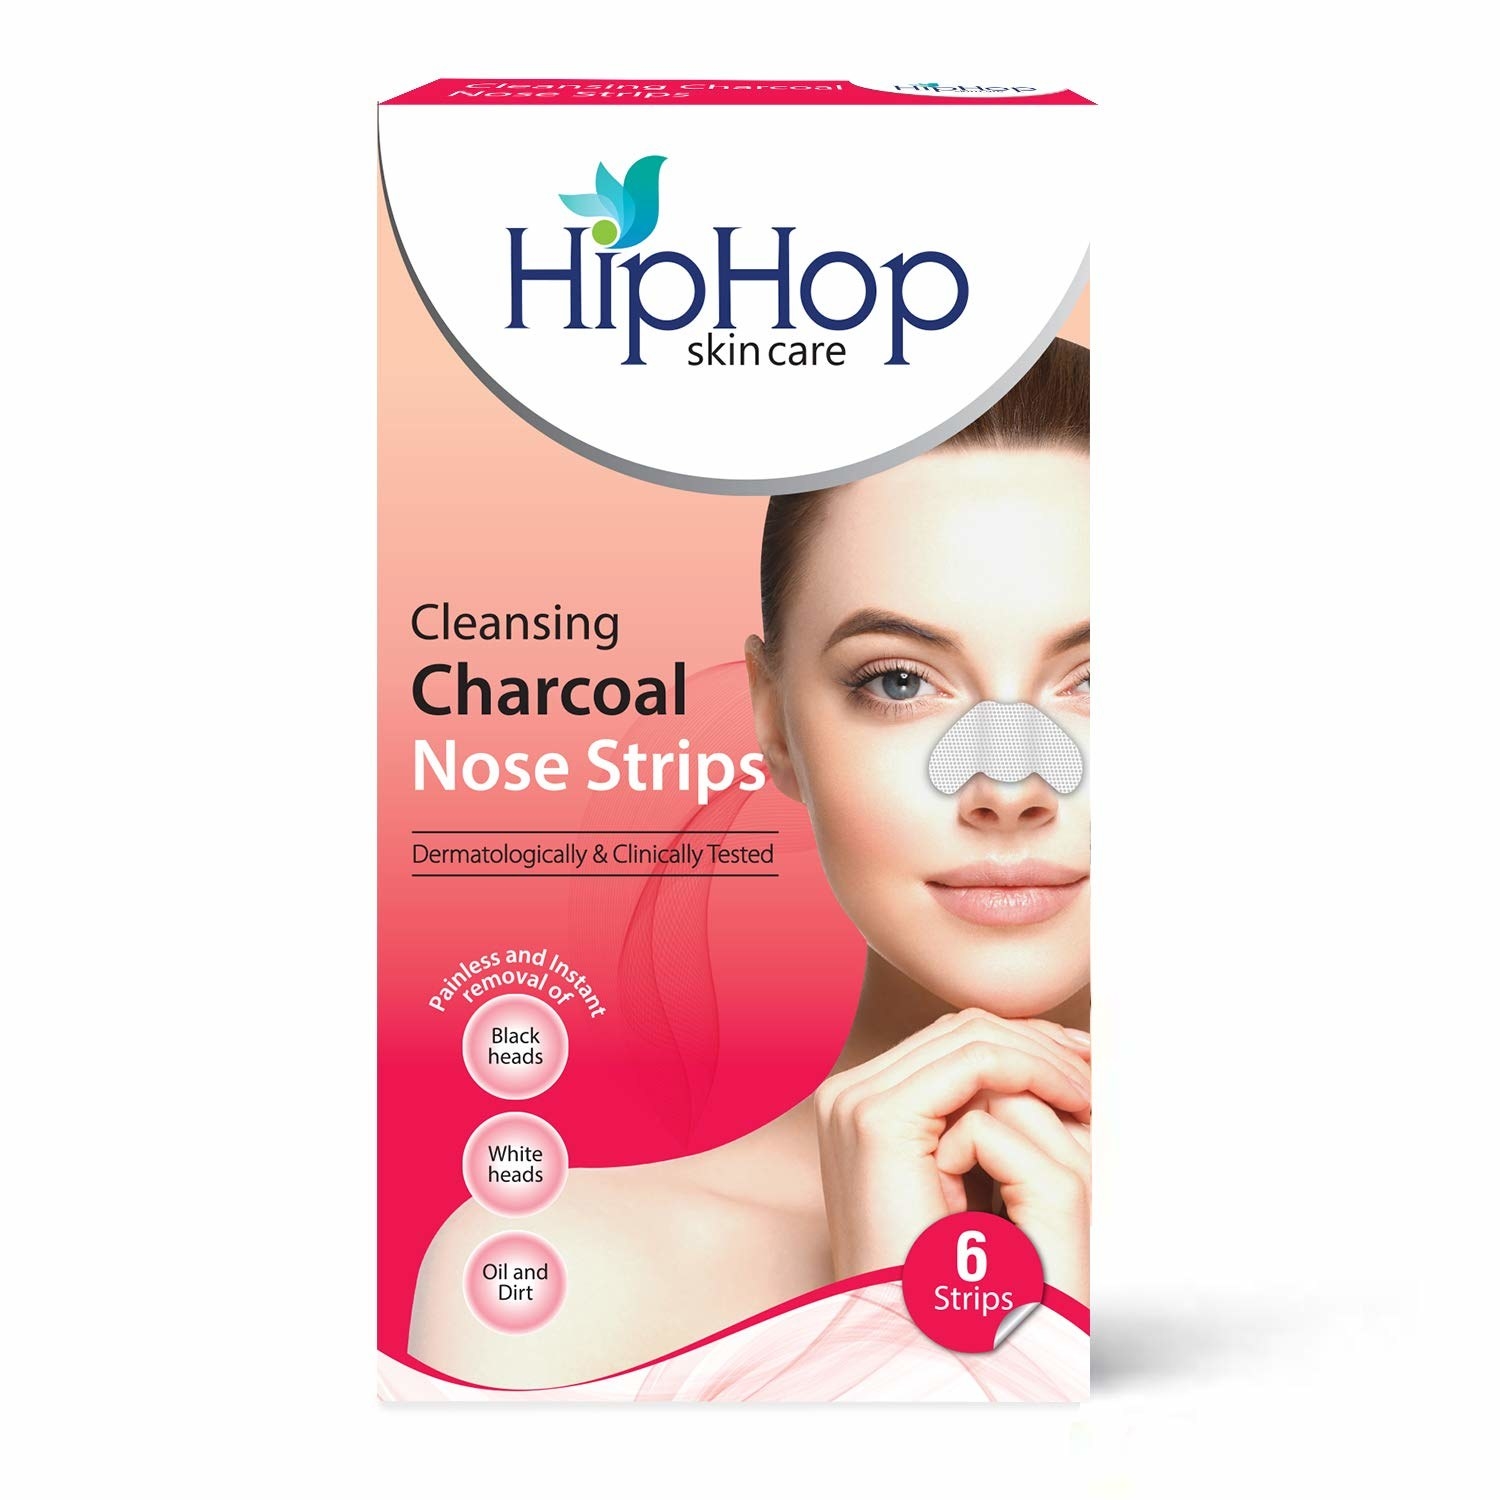 Hiphop skincare cleansing charcoal nose strips